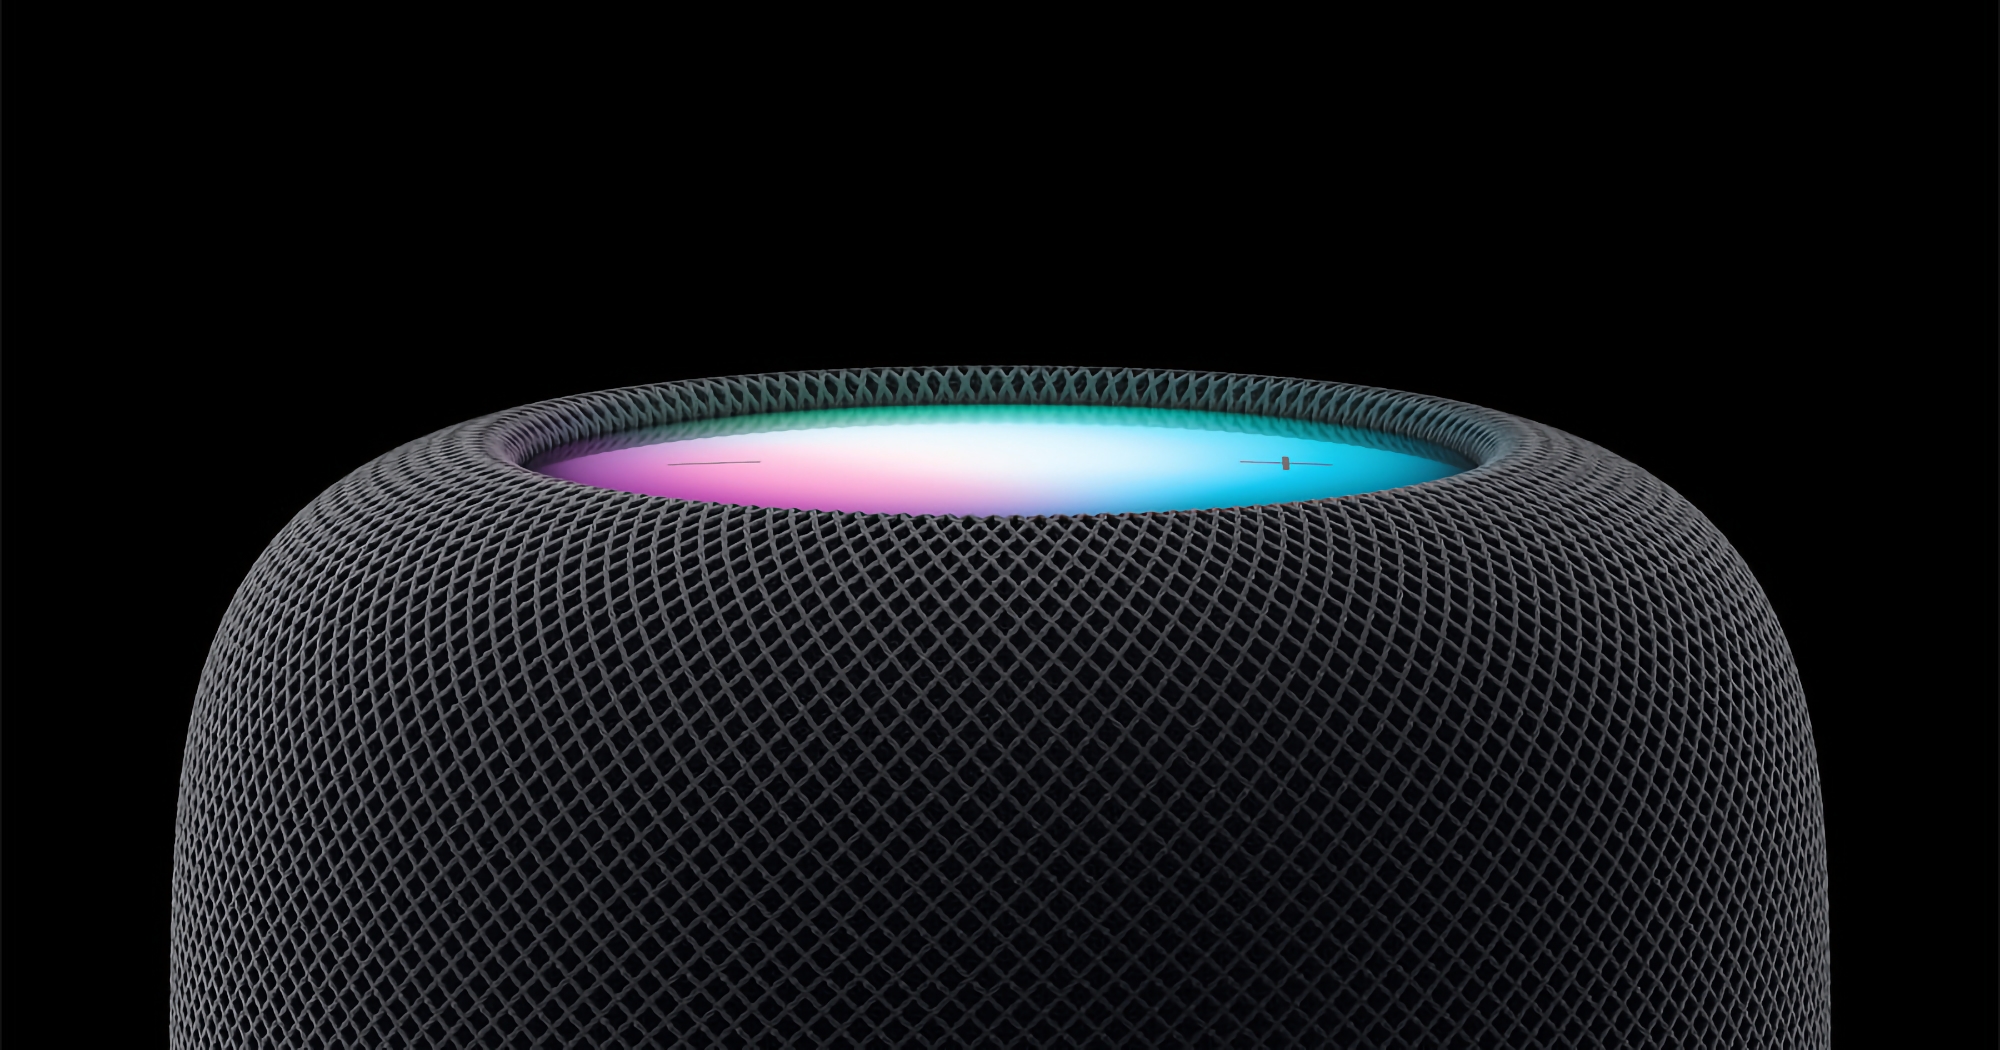 HomePod smart speaker users have started receiving a new version of the software